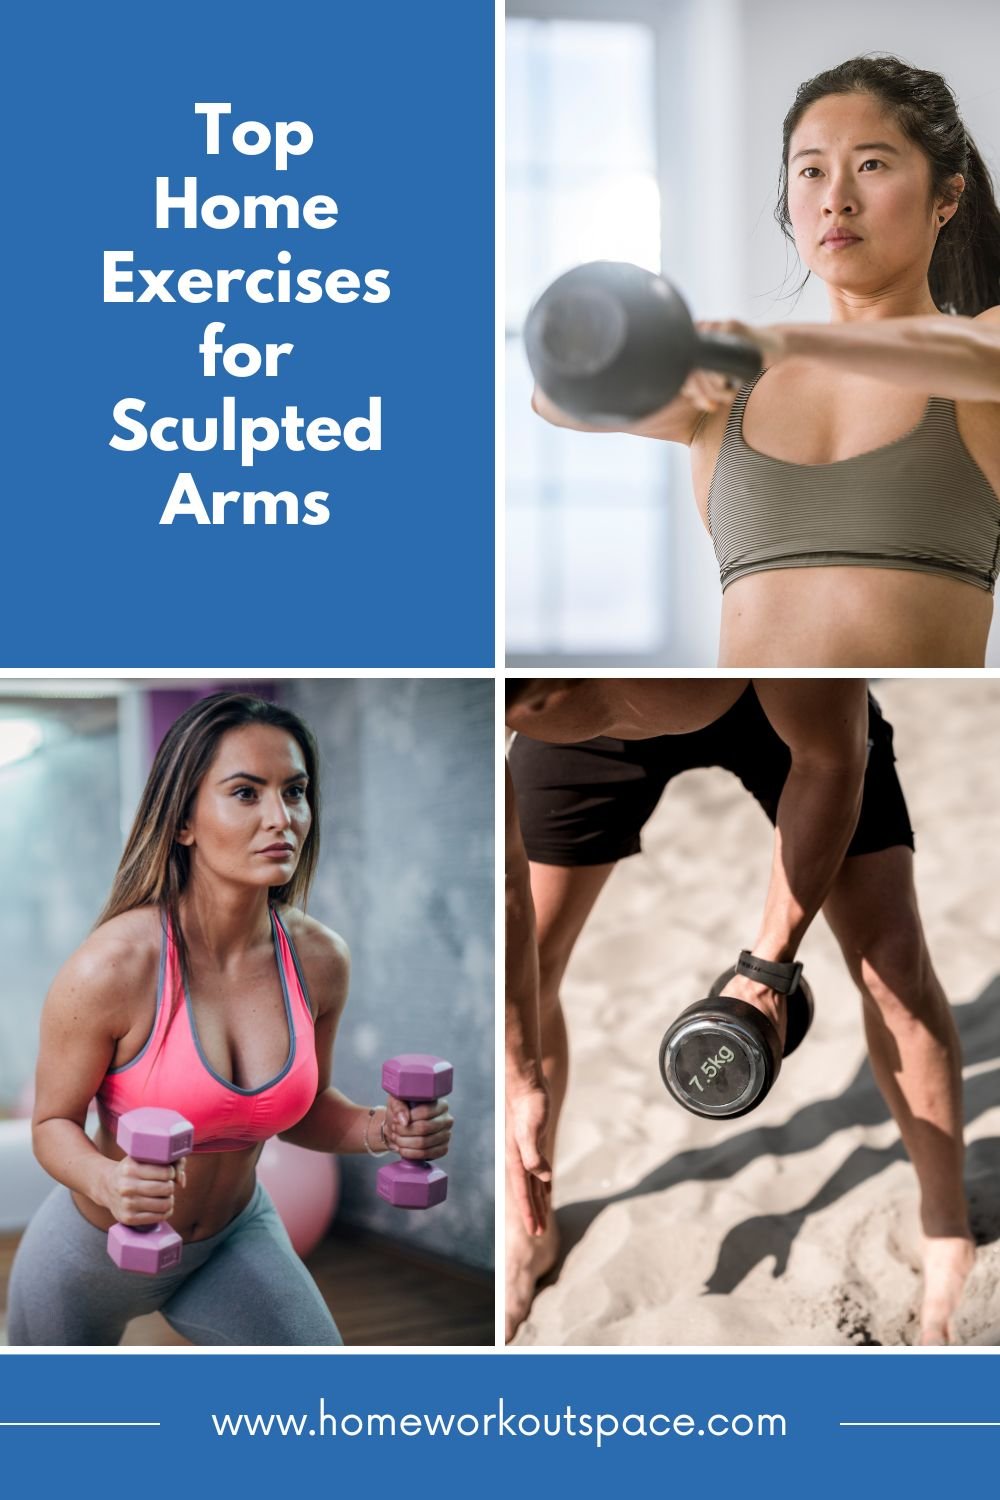 Top Home Exercises for Sculpted Arms